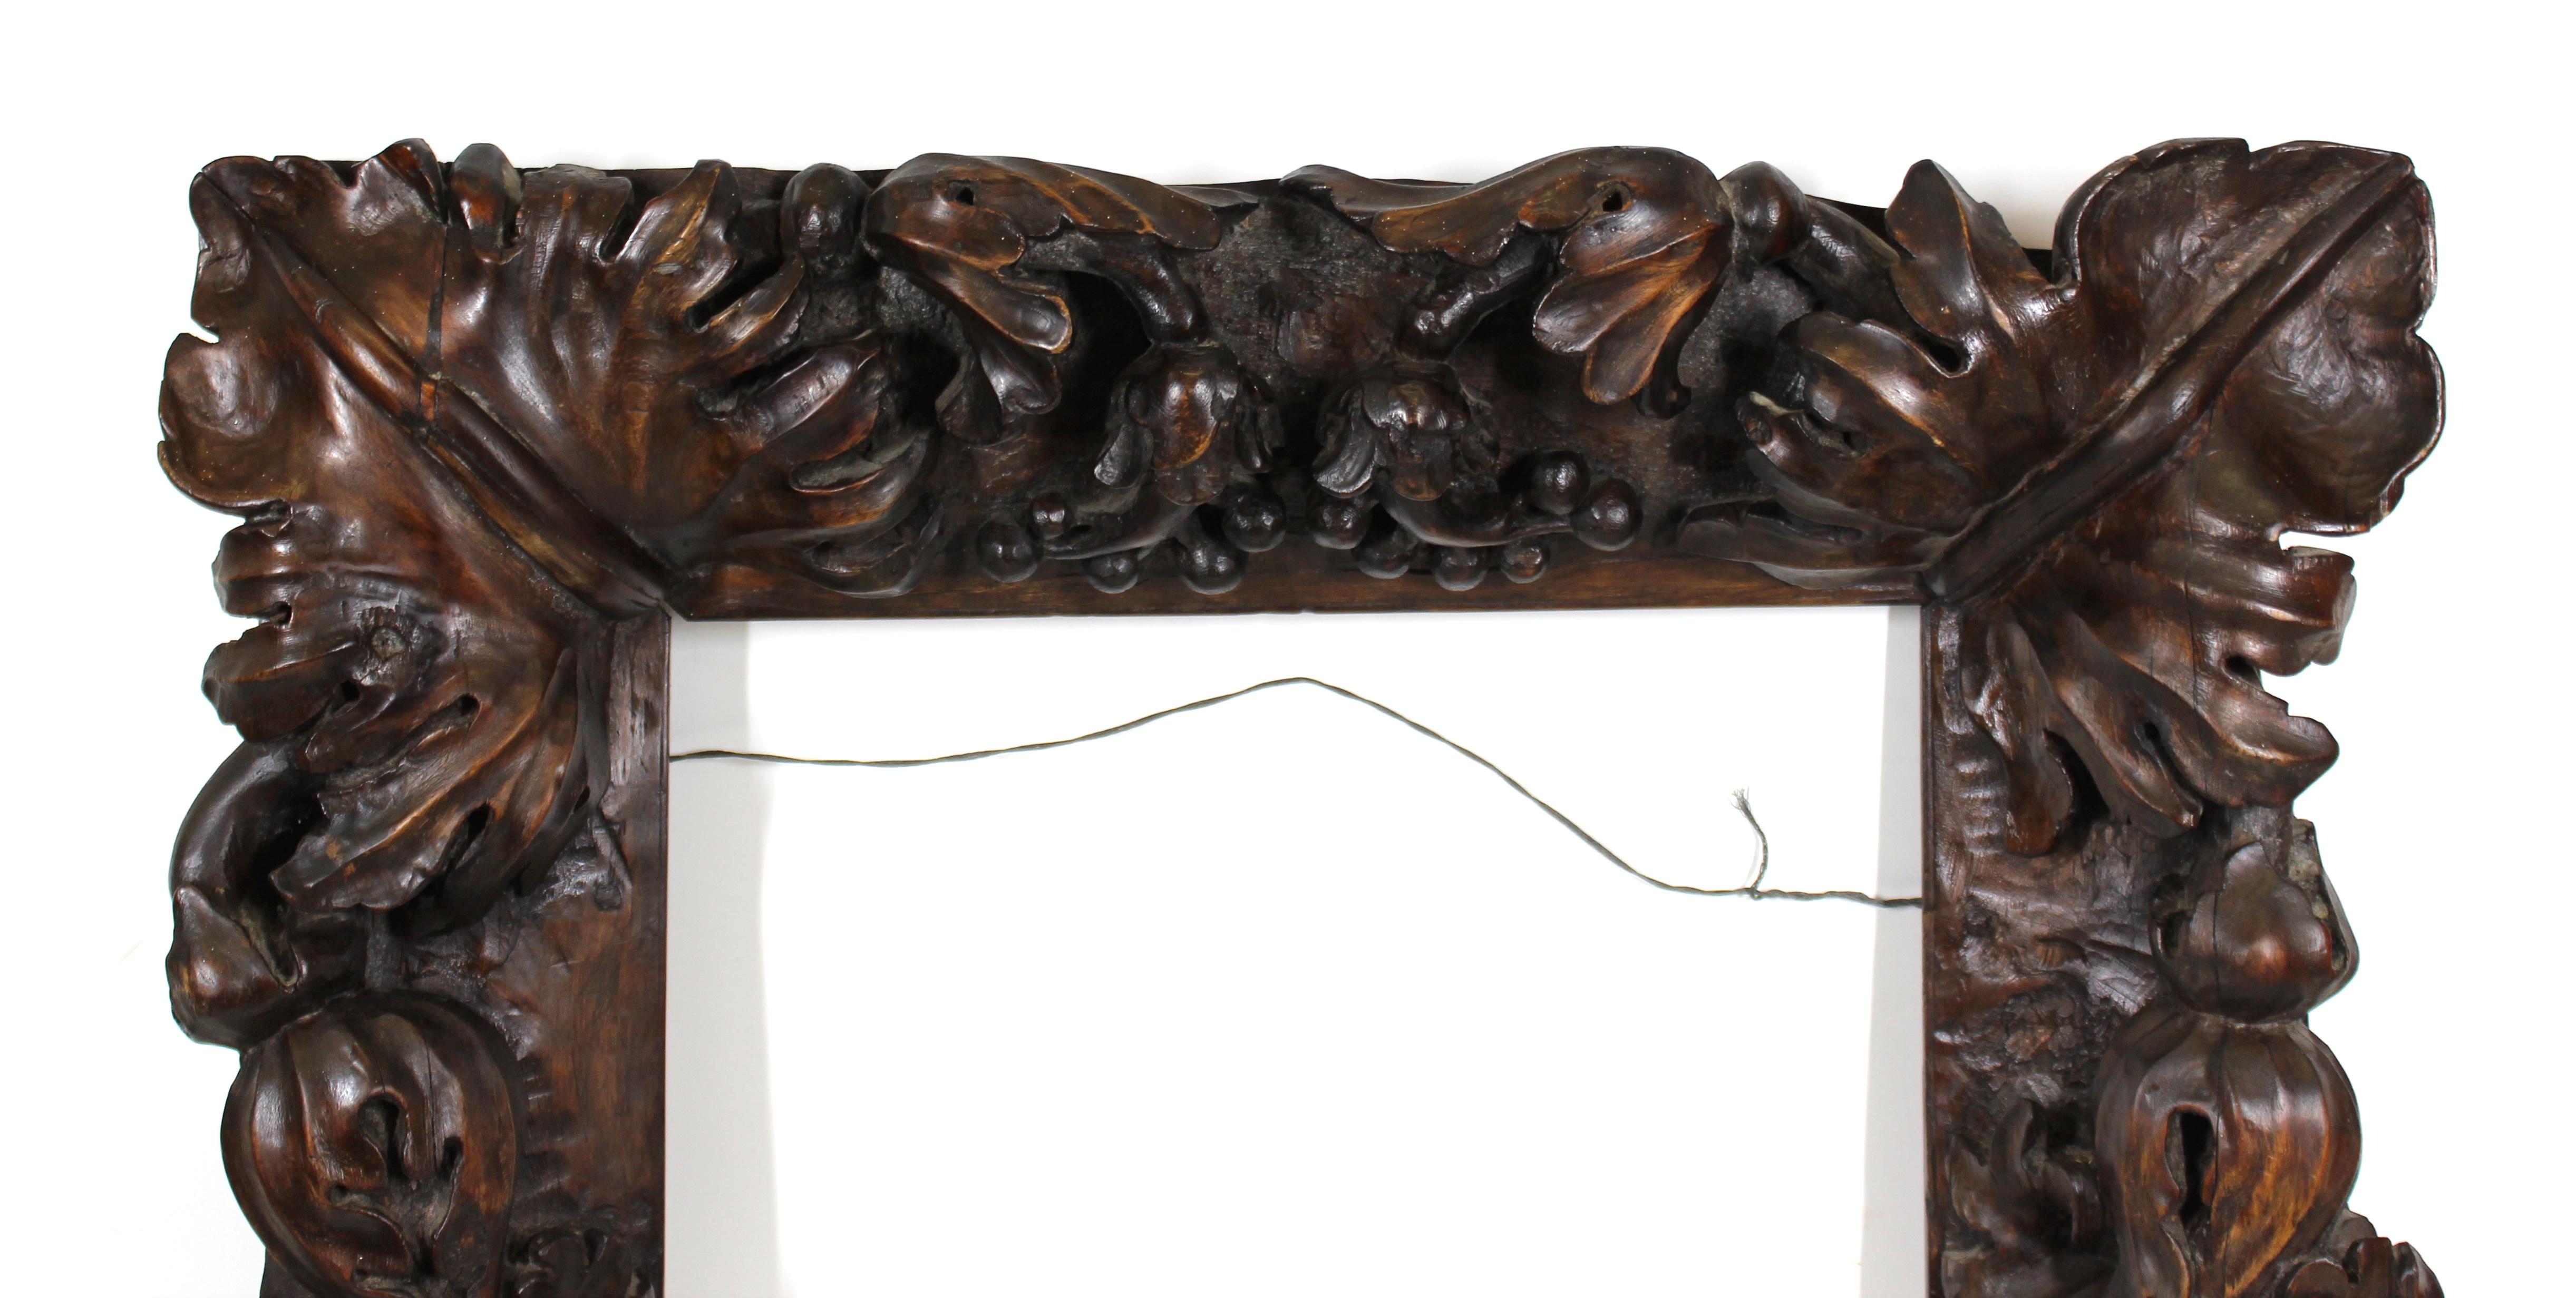 Continental tropical baroque heavy solid wood frame, carved by a master carver. The piece has elaborately carved opulent heavy foliage and was made during the 18th century in Europe. In remarkable antique condition with age-appropriate wear and use.